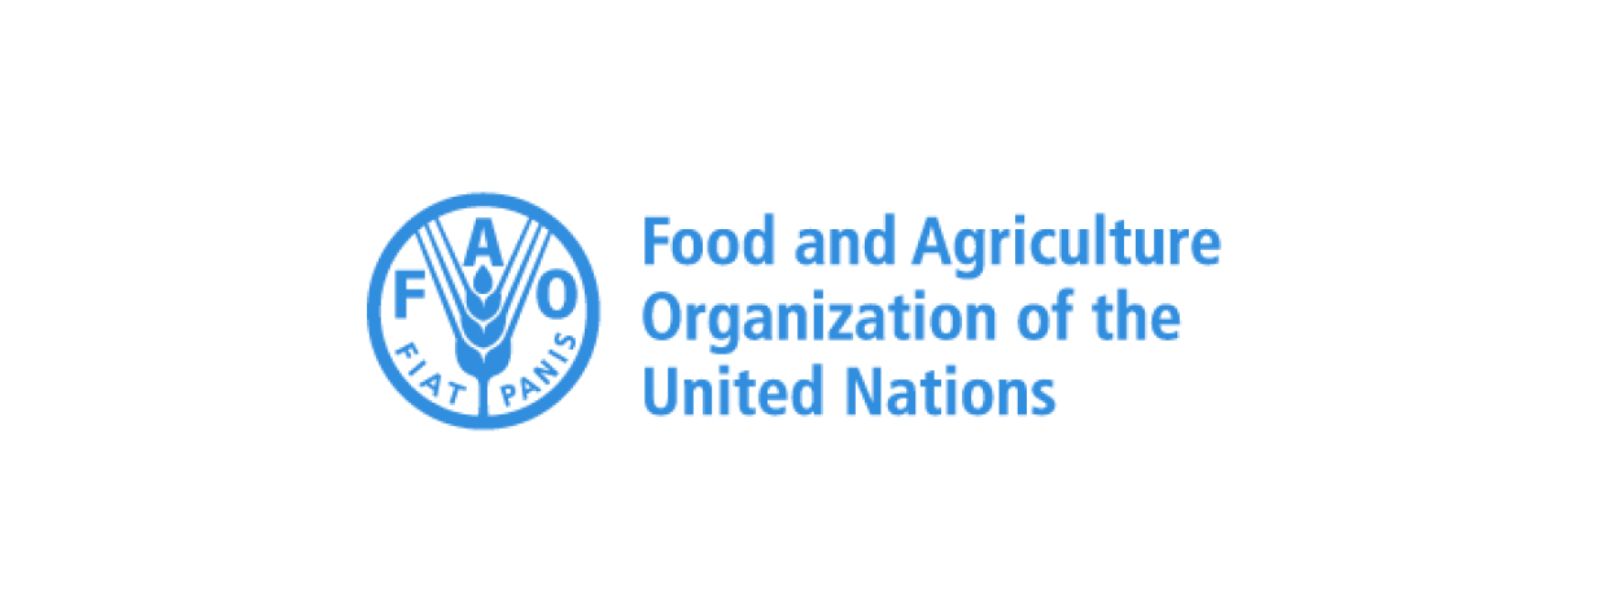 Countries unite for agrifood system transformation